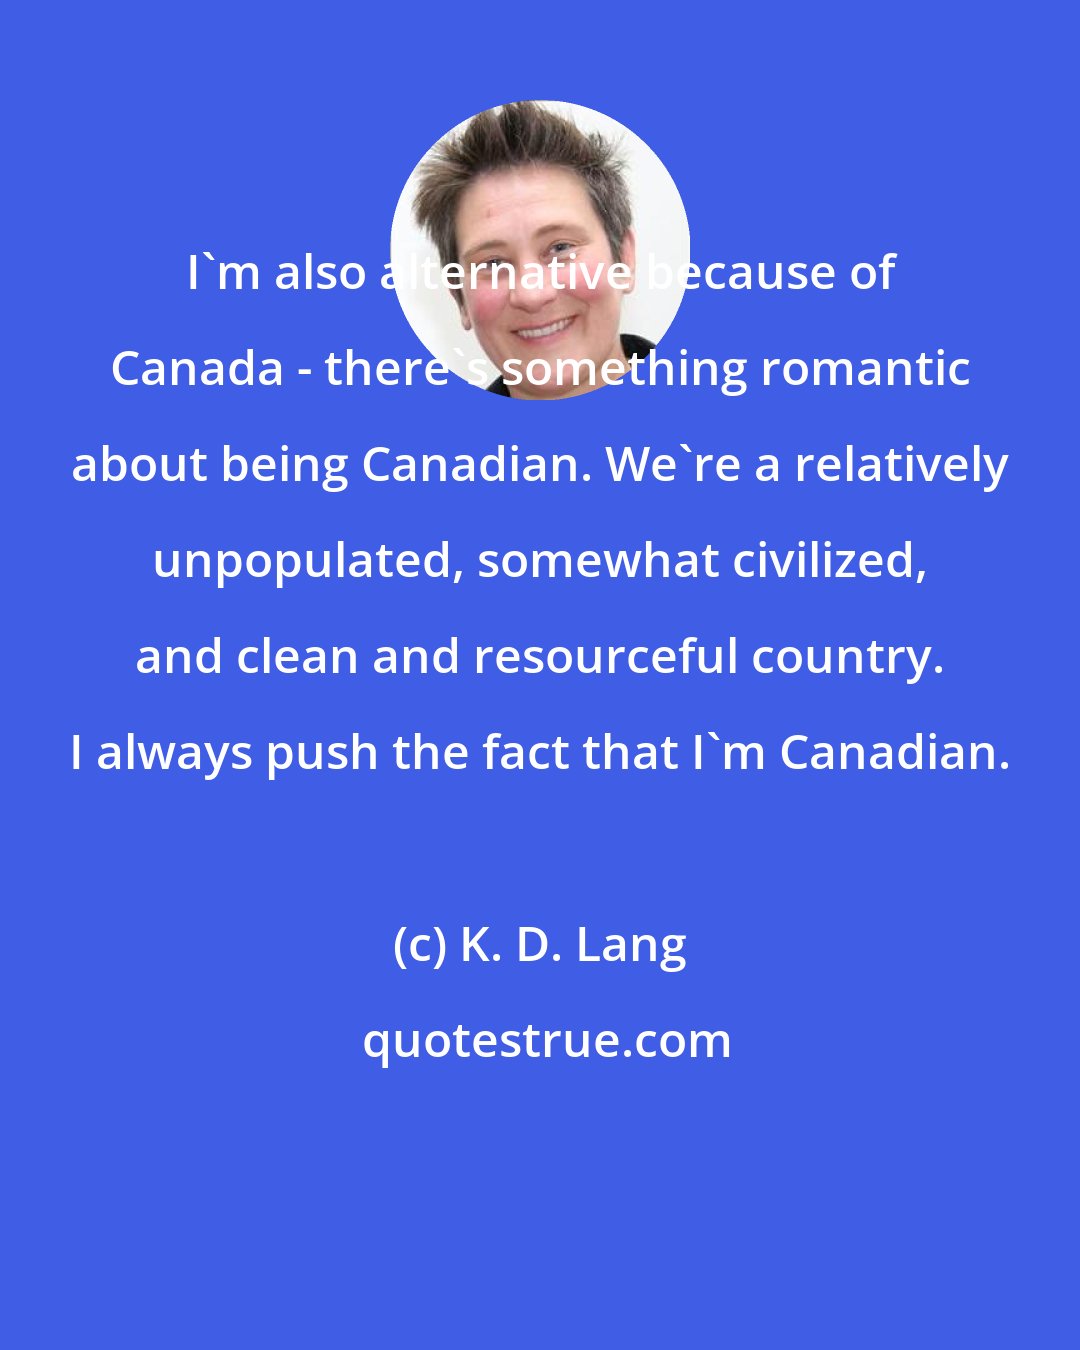 K. D. Lang: I'm also alternative because of Canada - there's something romantic about being Canadian. We're a relatively unpopulated, somewhat civilized, and clean and resourceful country. I always push the fact that I'm Canadian.